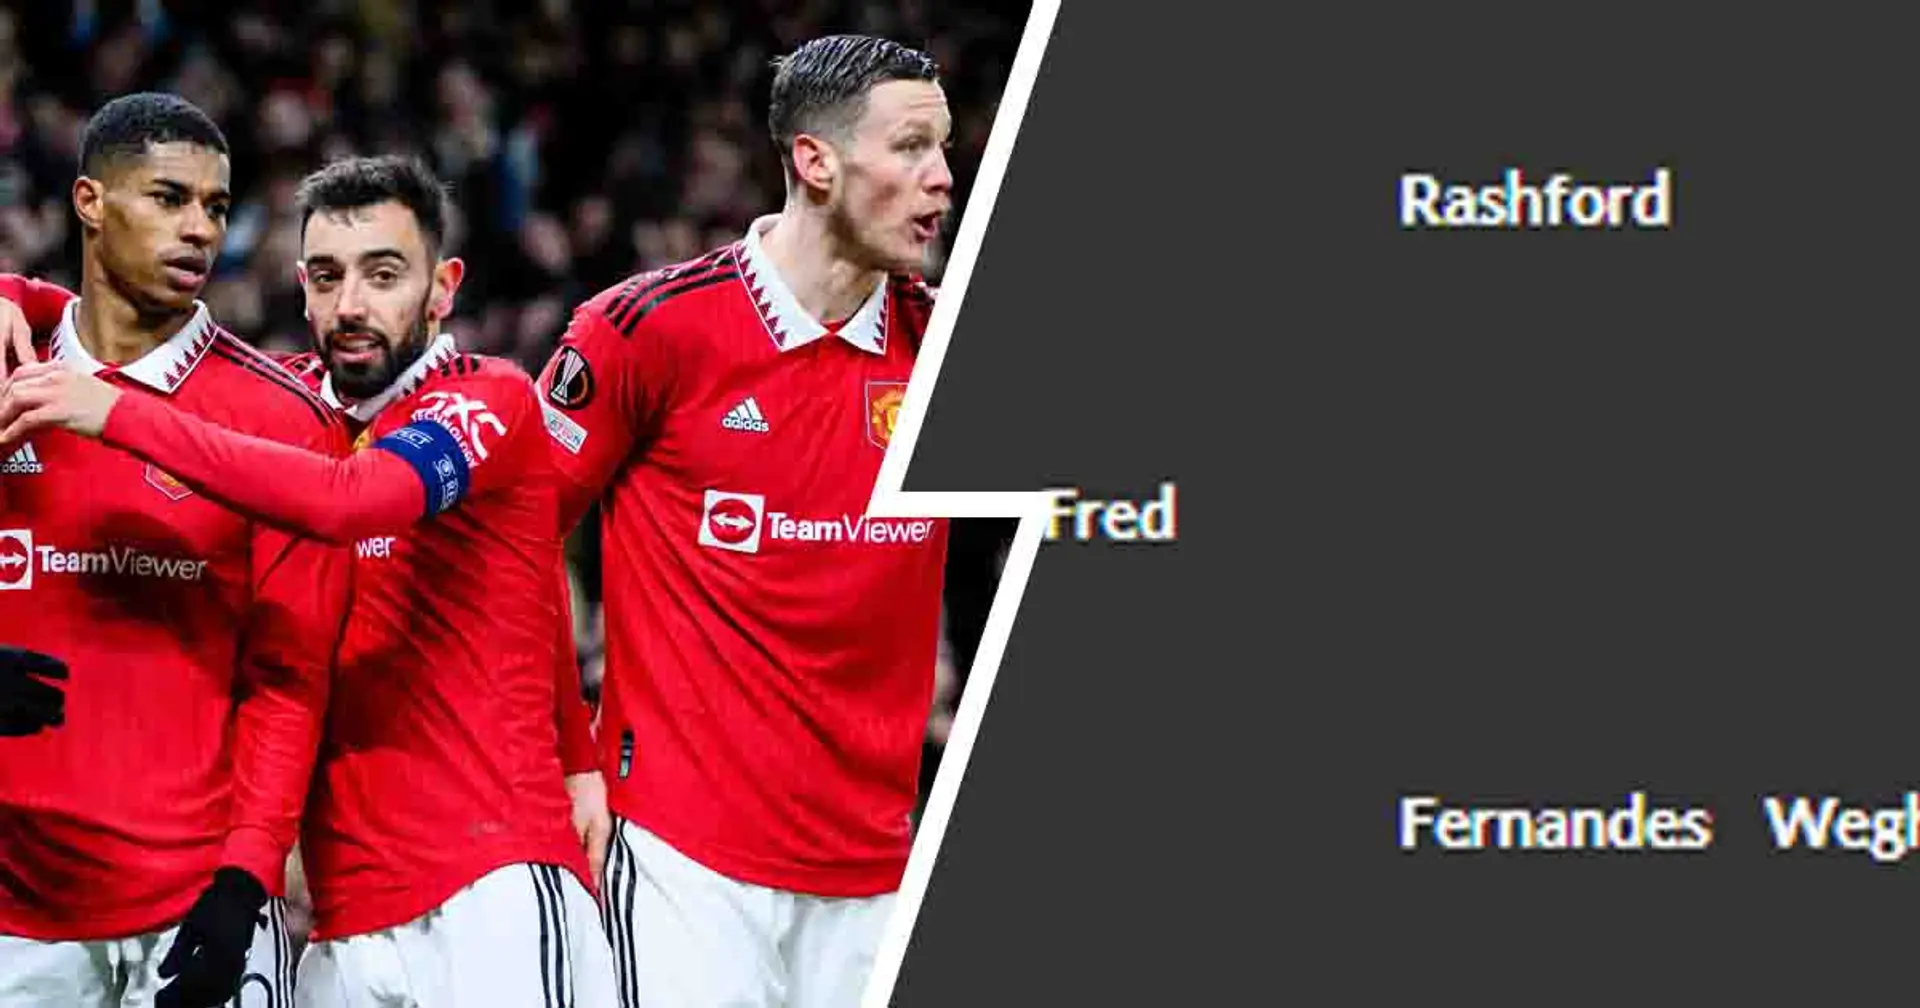 Pellistri gets another start: Team News and Probable XIs for Man United’s FA Cup quarterfinal vs Fulham